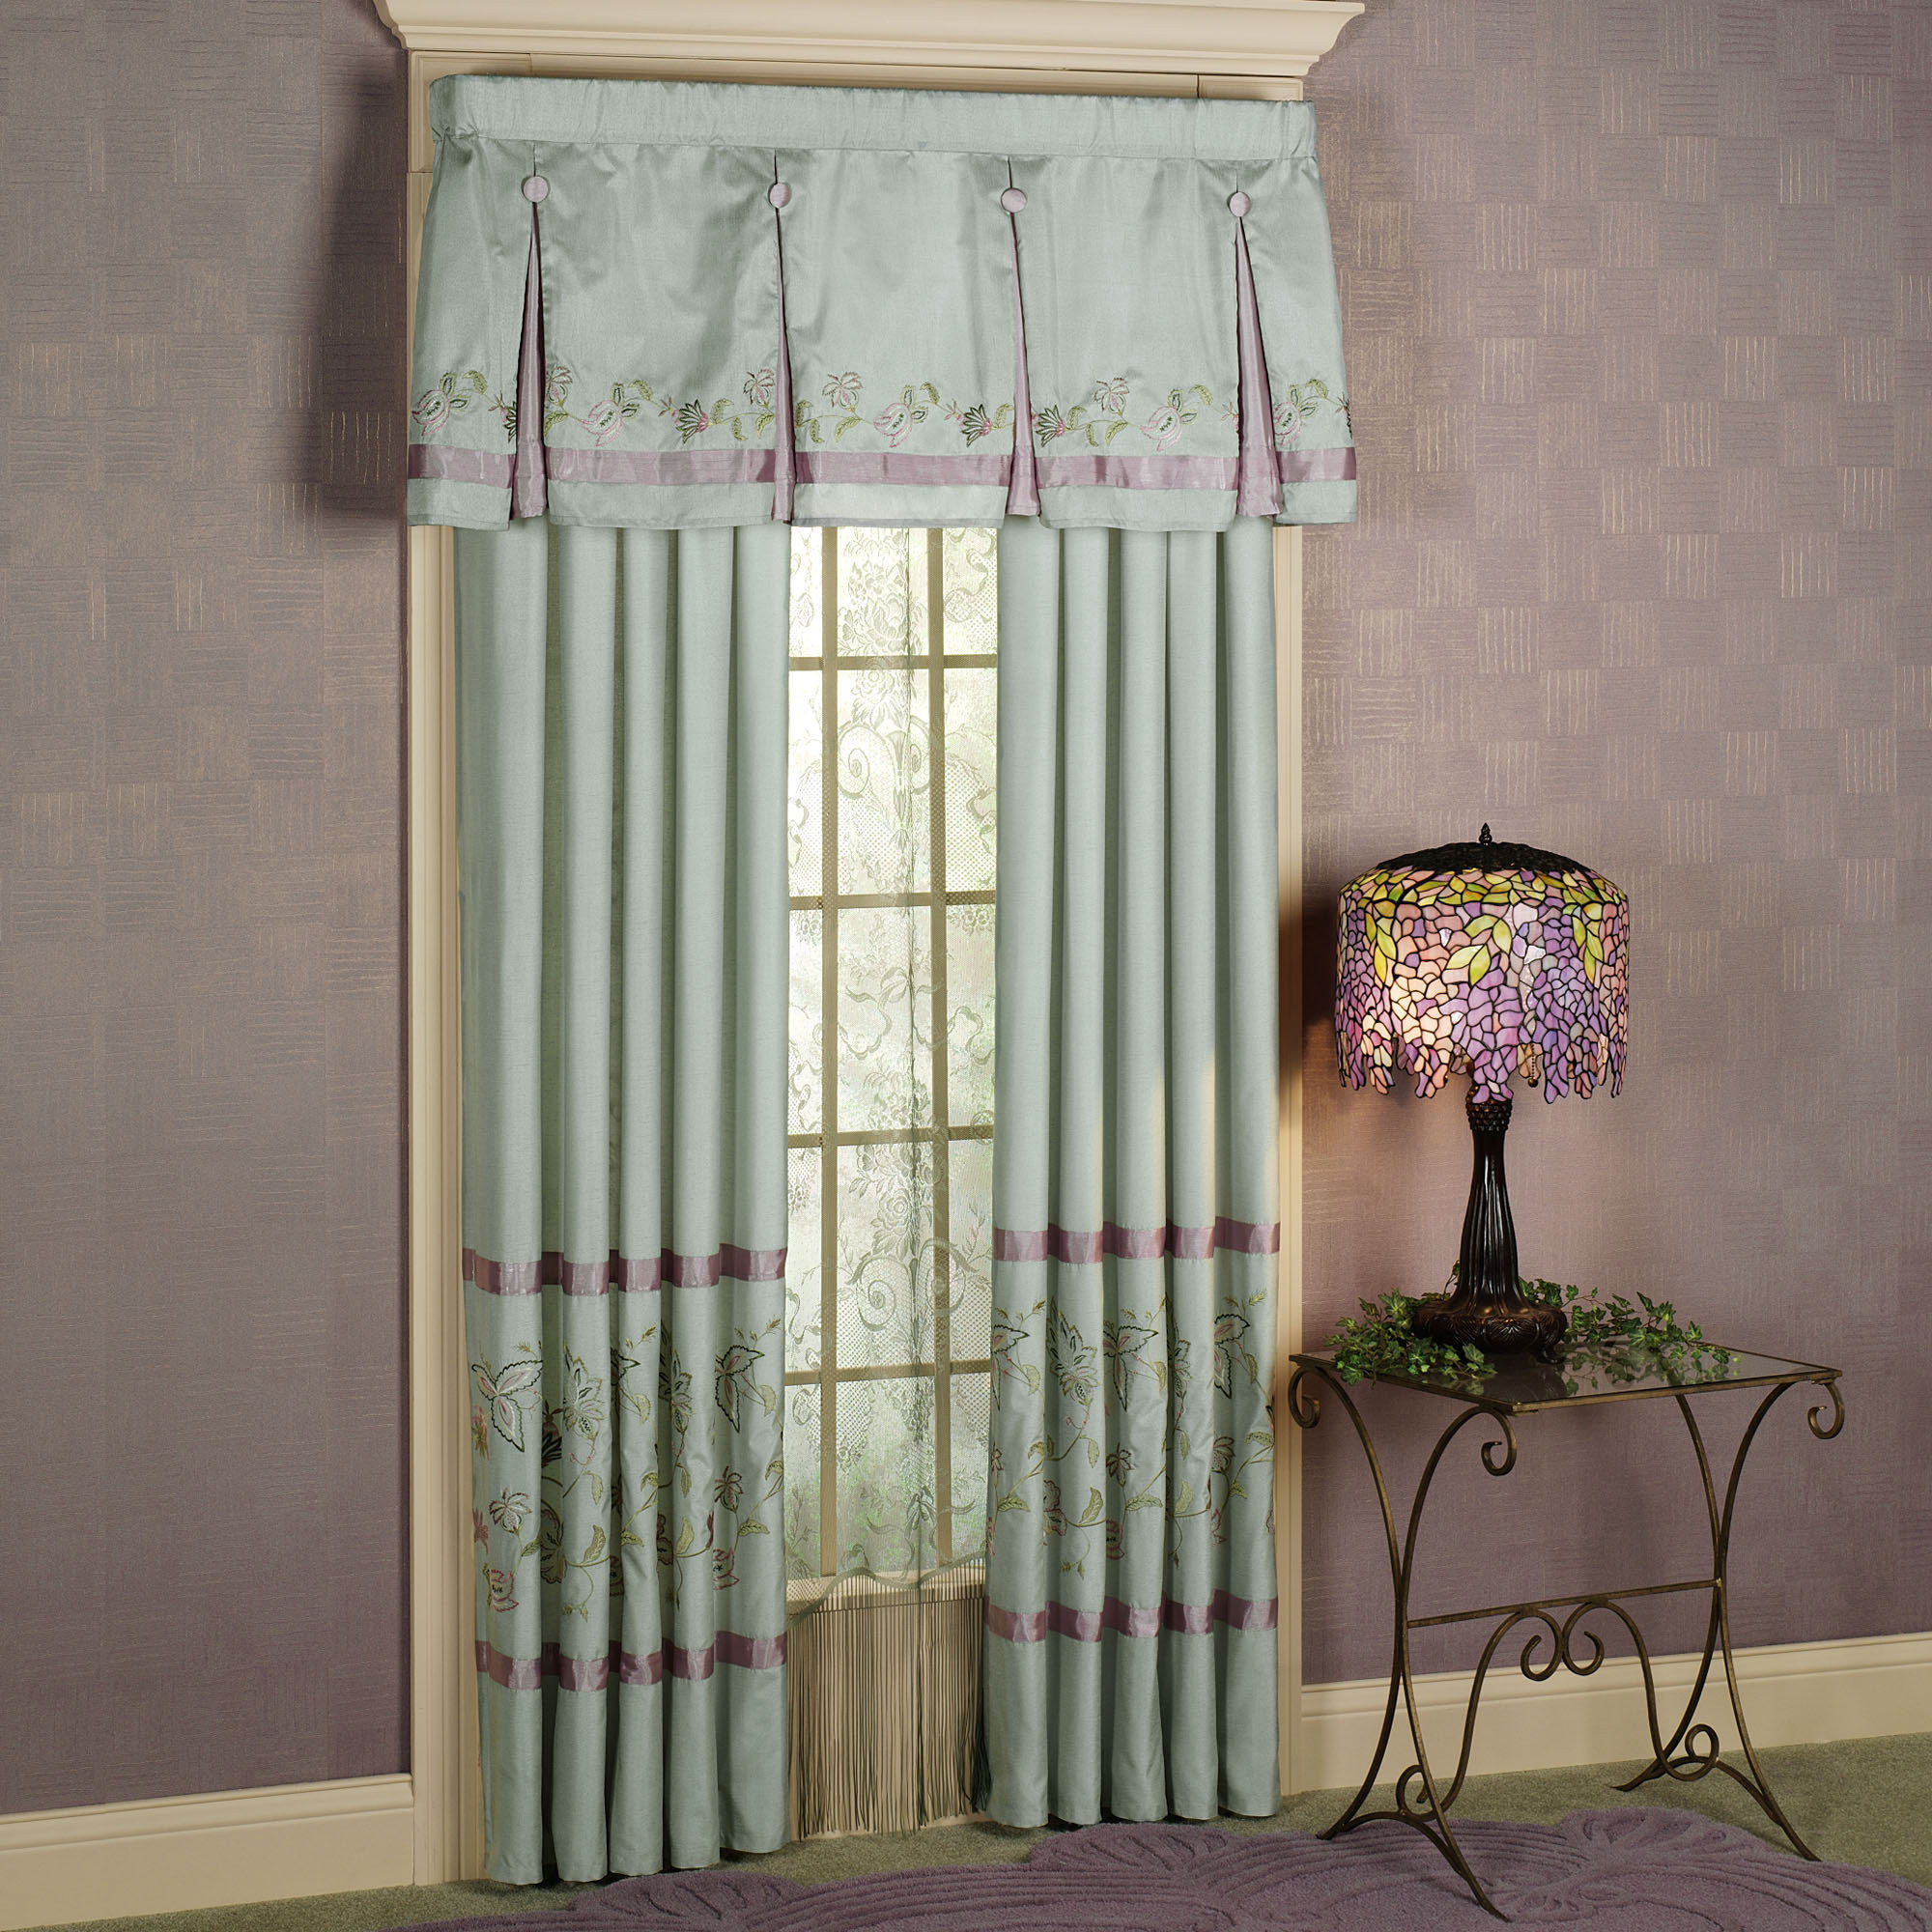 Jcpenney Living Room Curtains
 Curtain Elegant Interior Home Decorating Ideas With